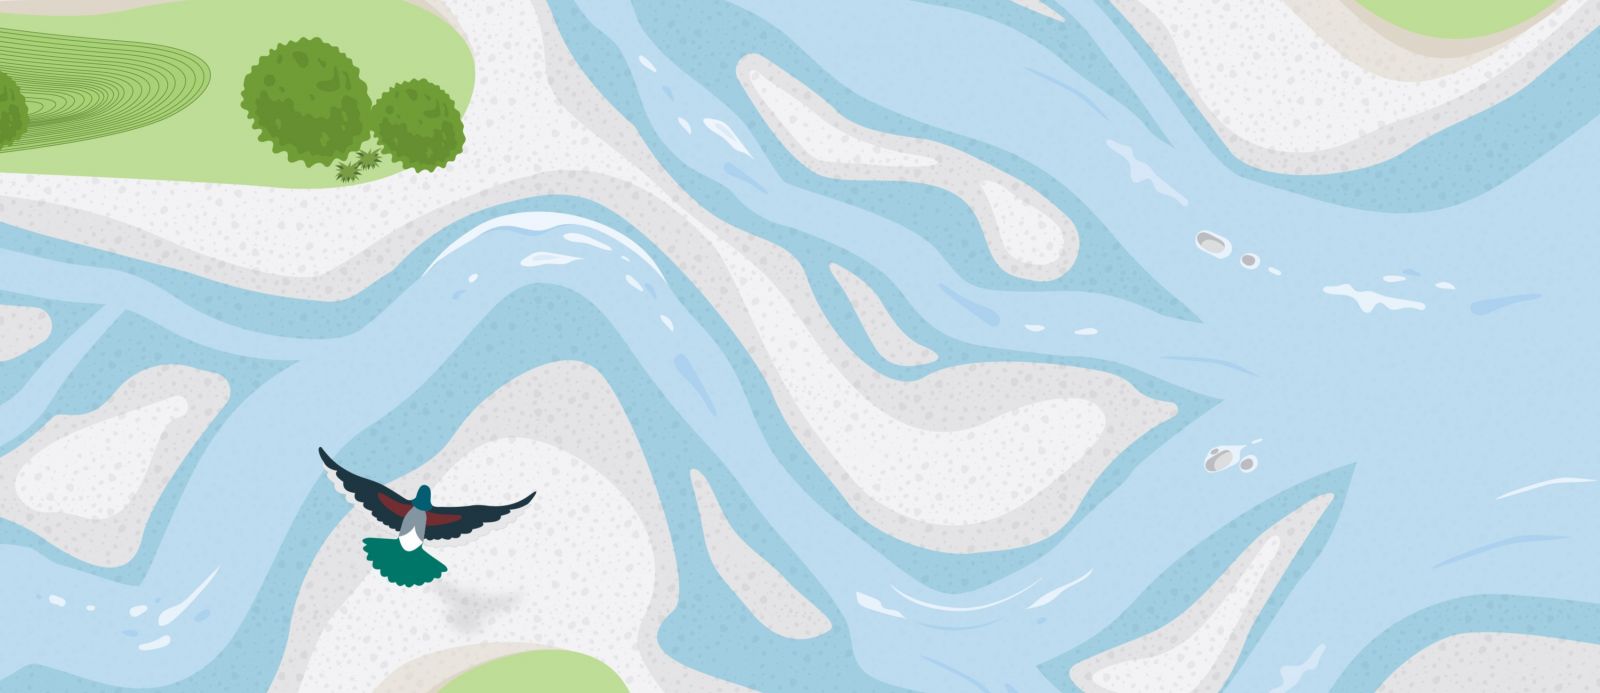 Graphic illustration of a braided river